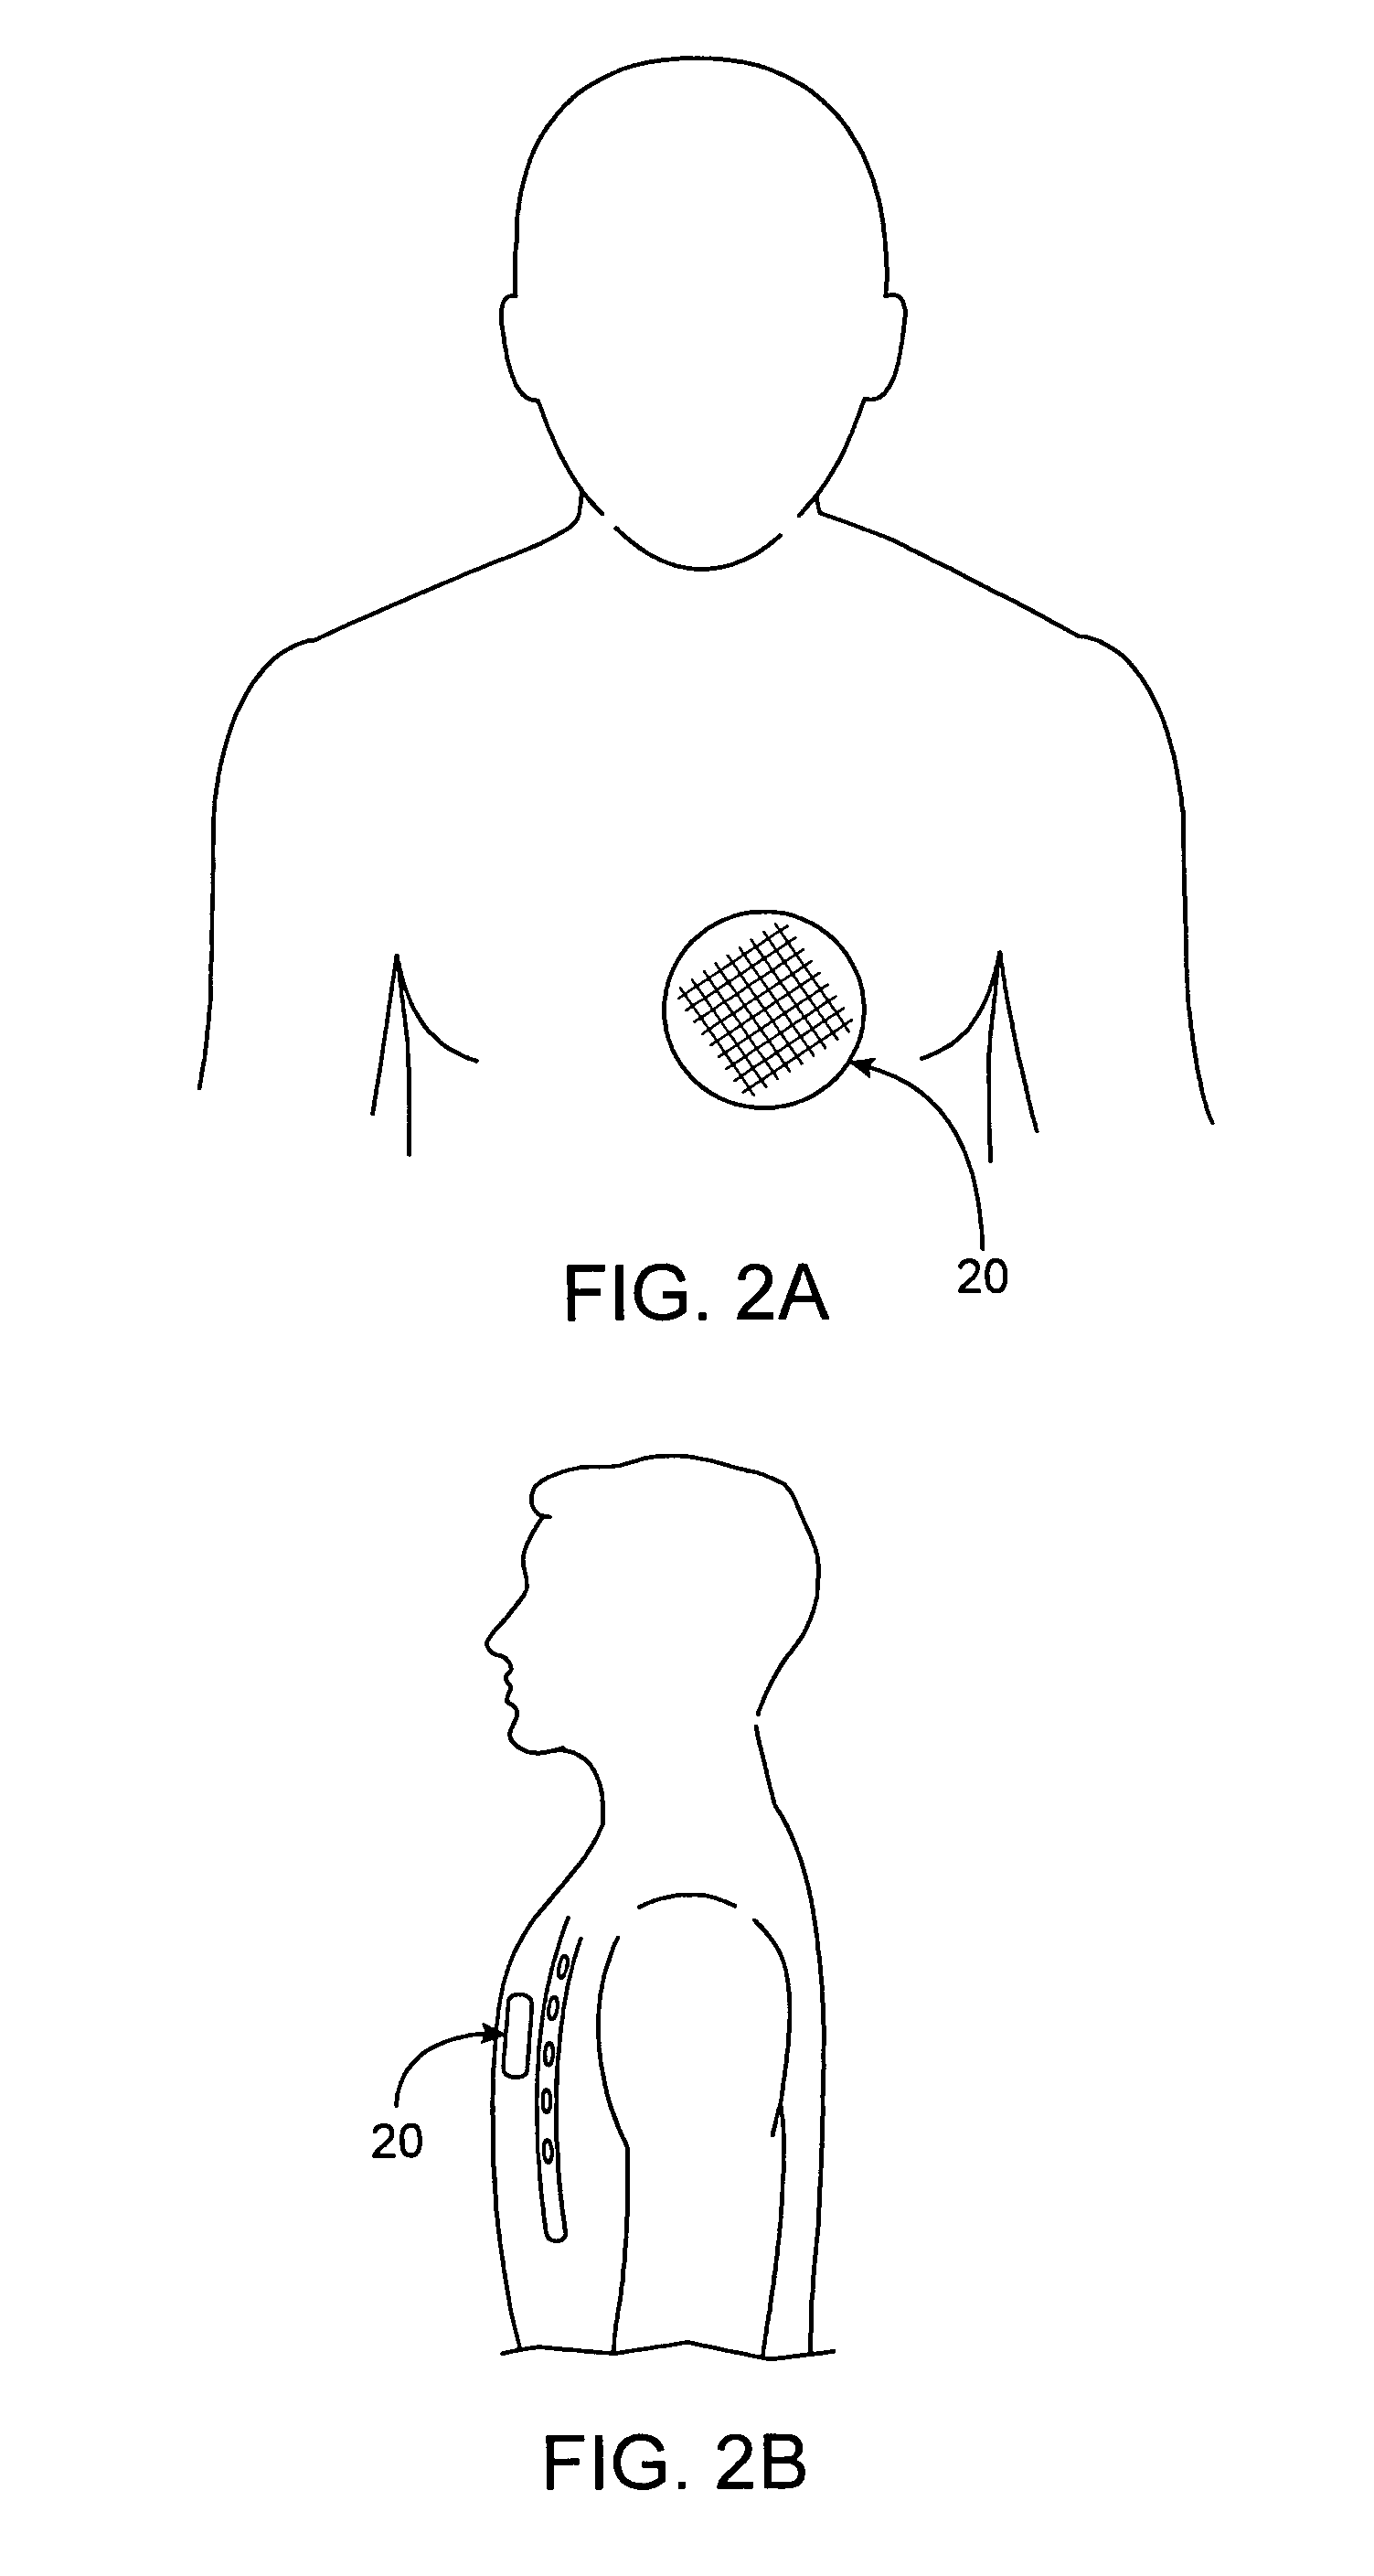 Vibrational therapy device used for resynchronization pacing in a treatment for heart failure